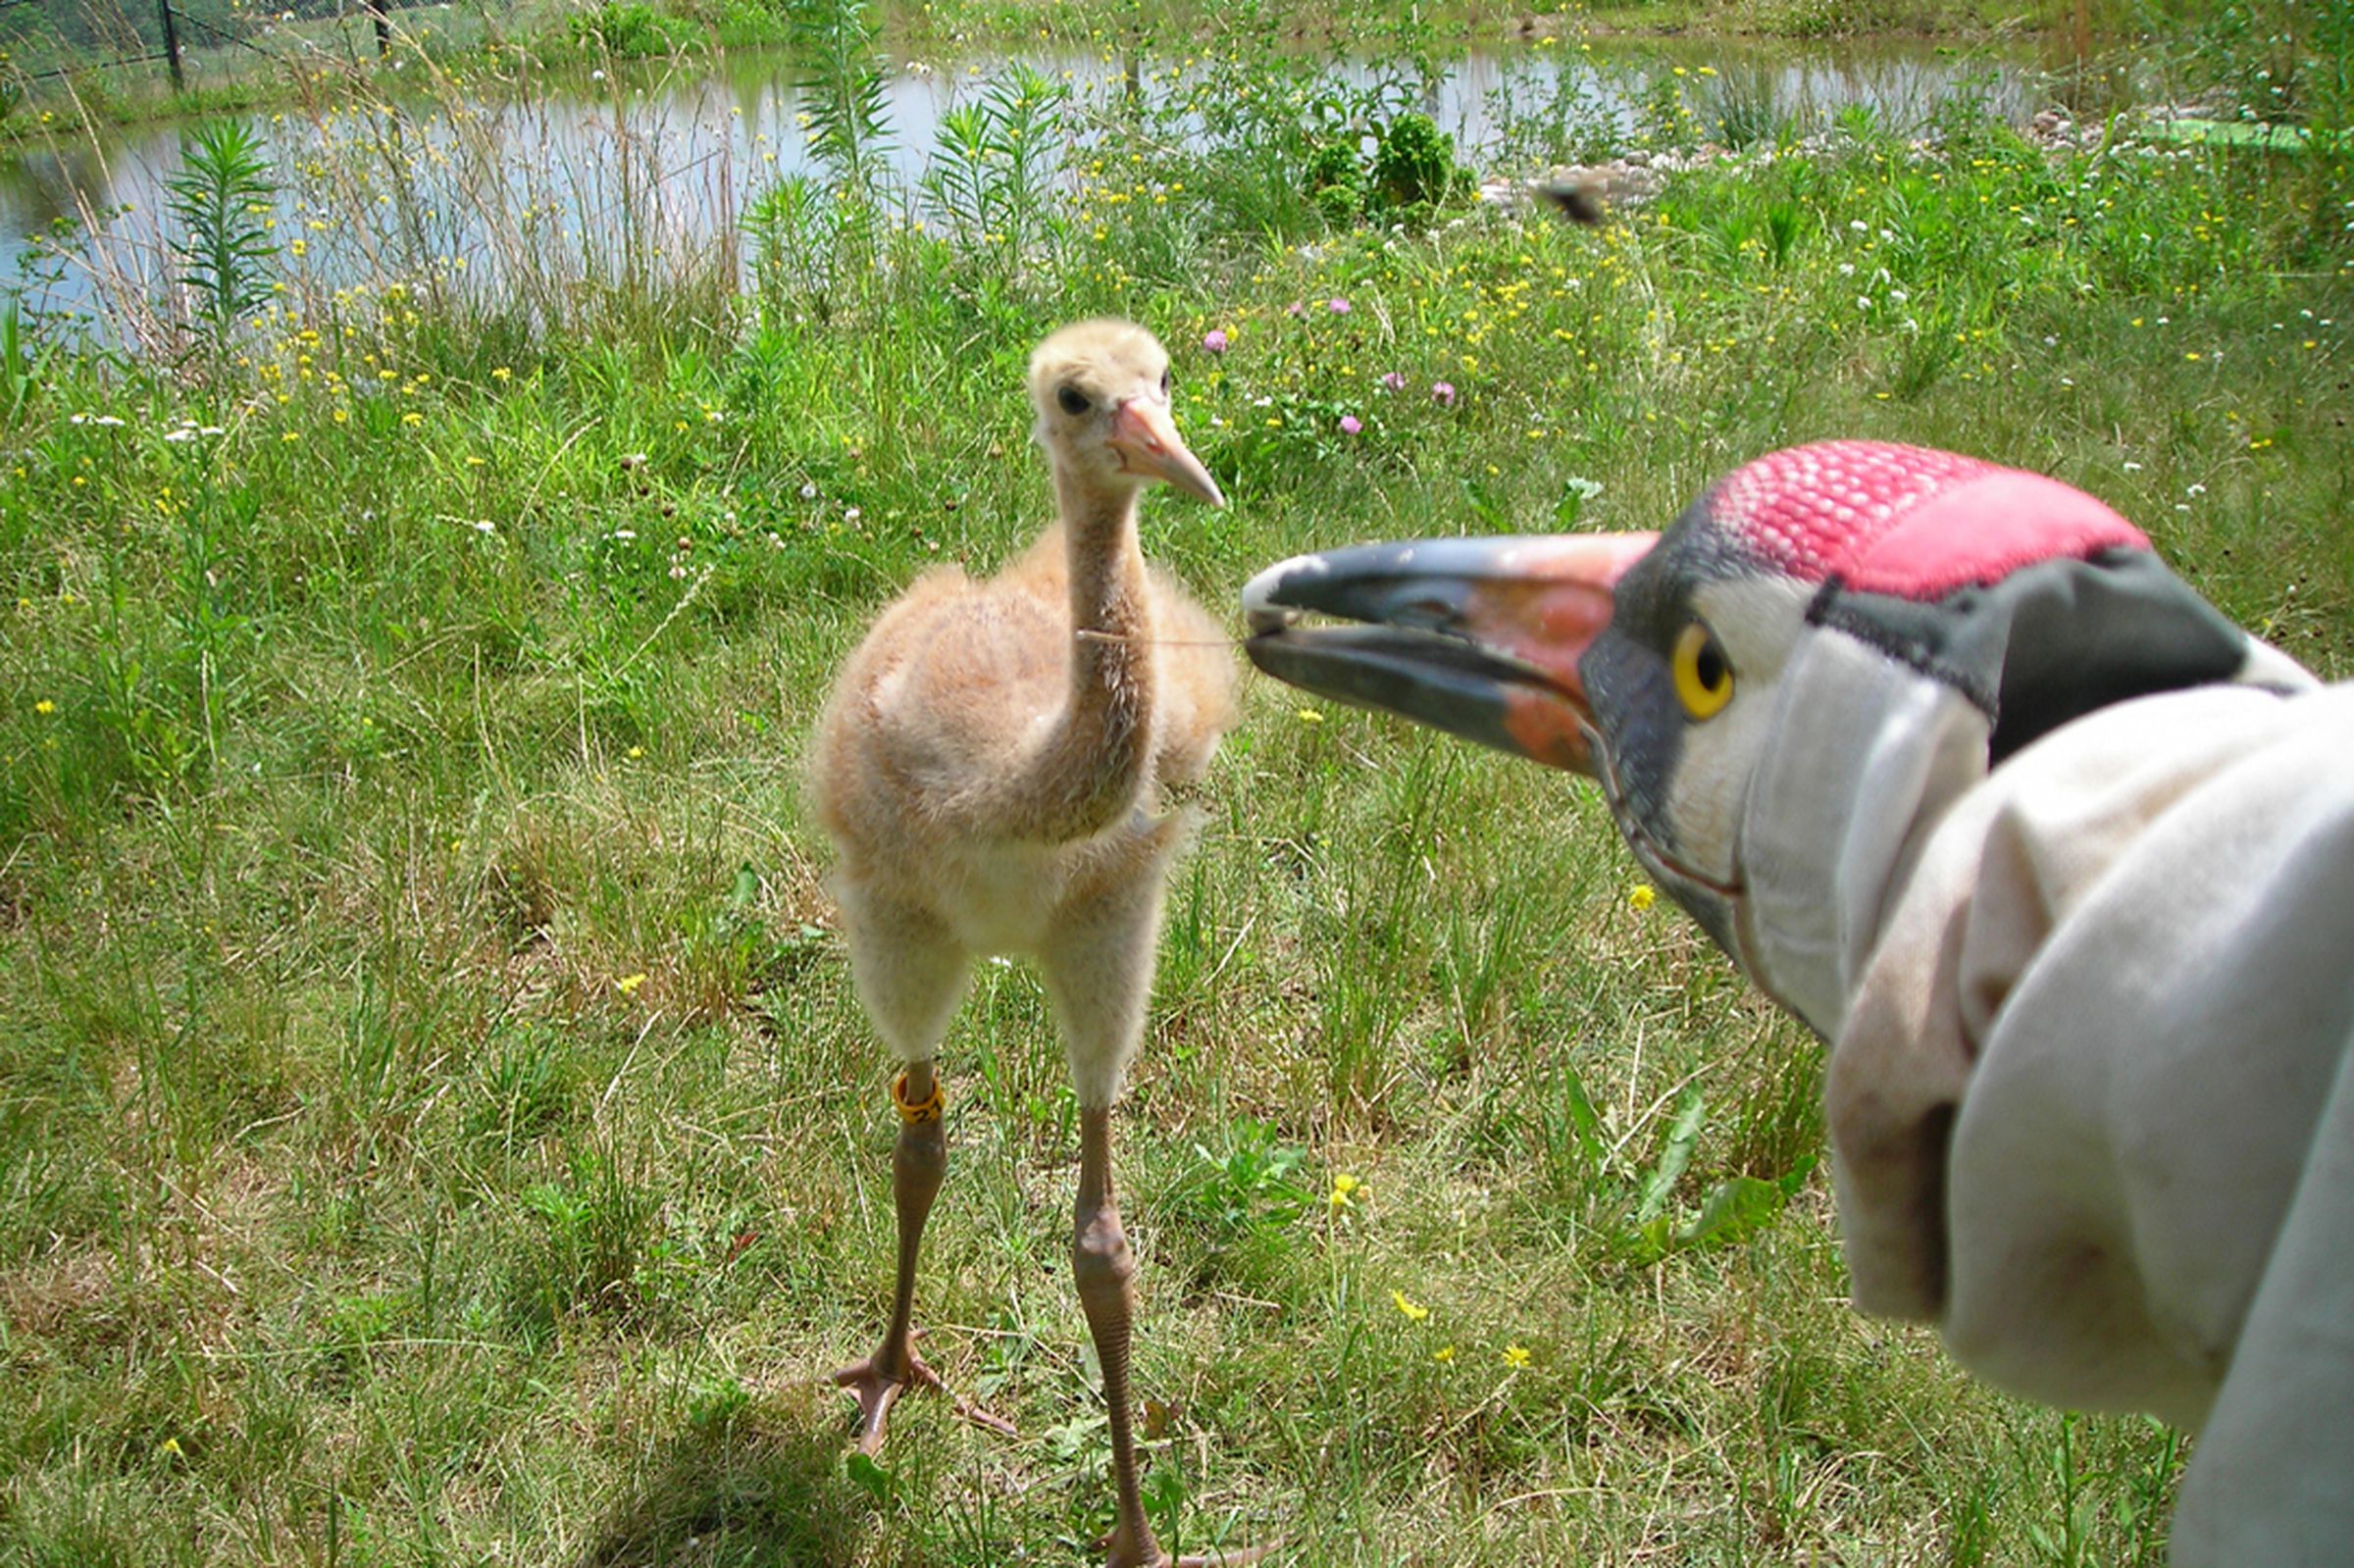 Whooping crane hand puppet